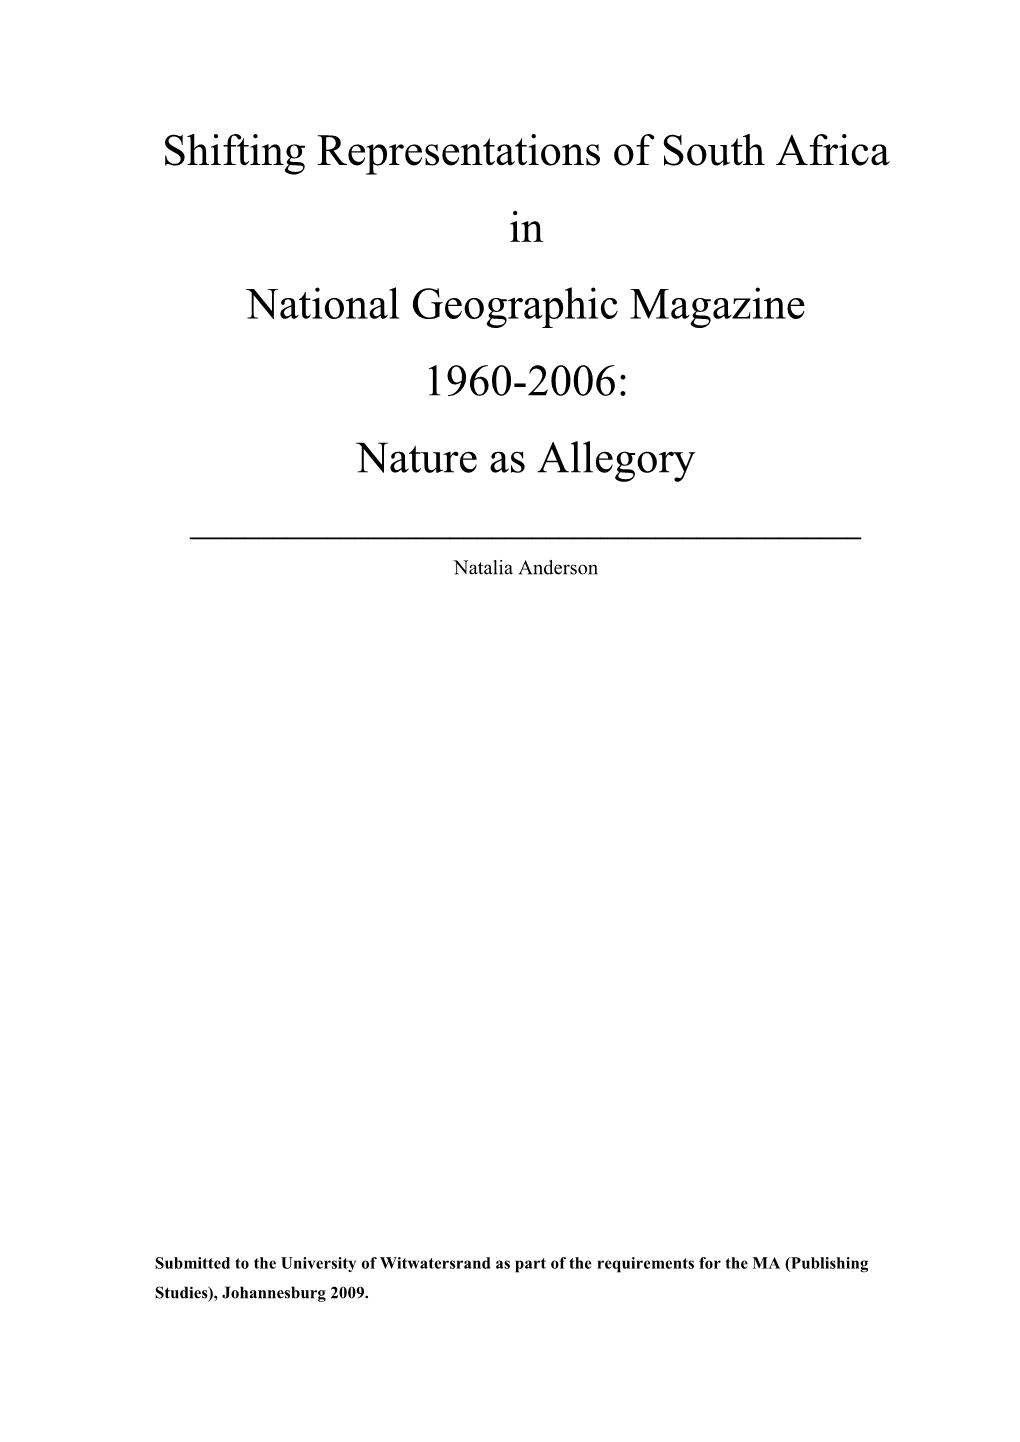 Shifting Representations of South Africa in National Geographic Magazine 1960-2006: Nature As Allegory